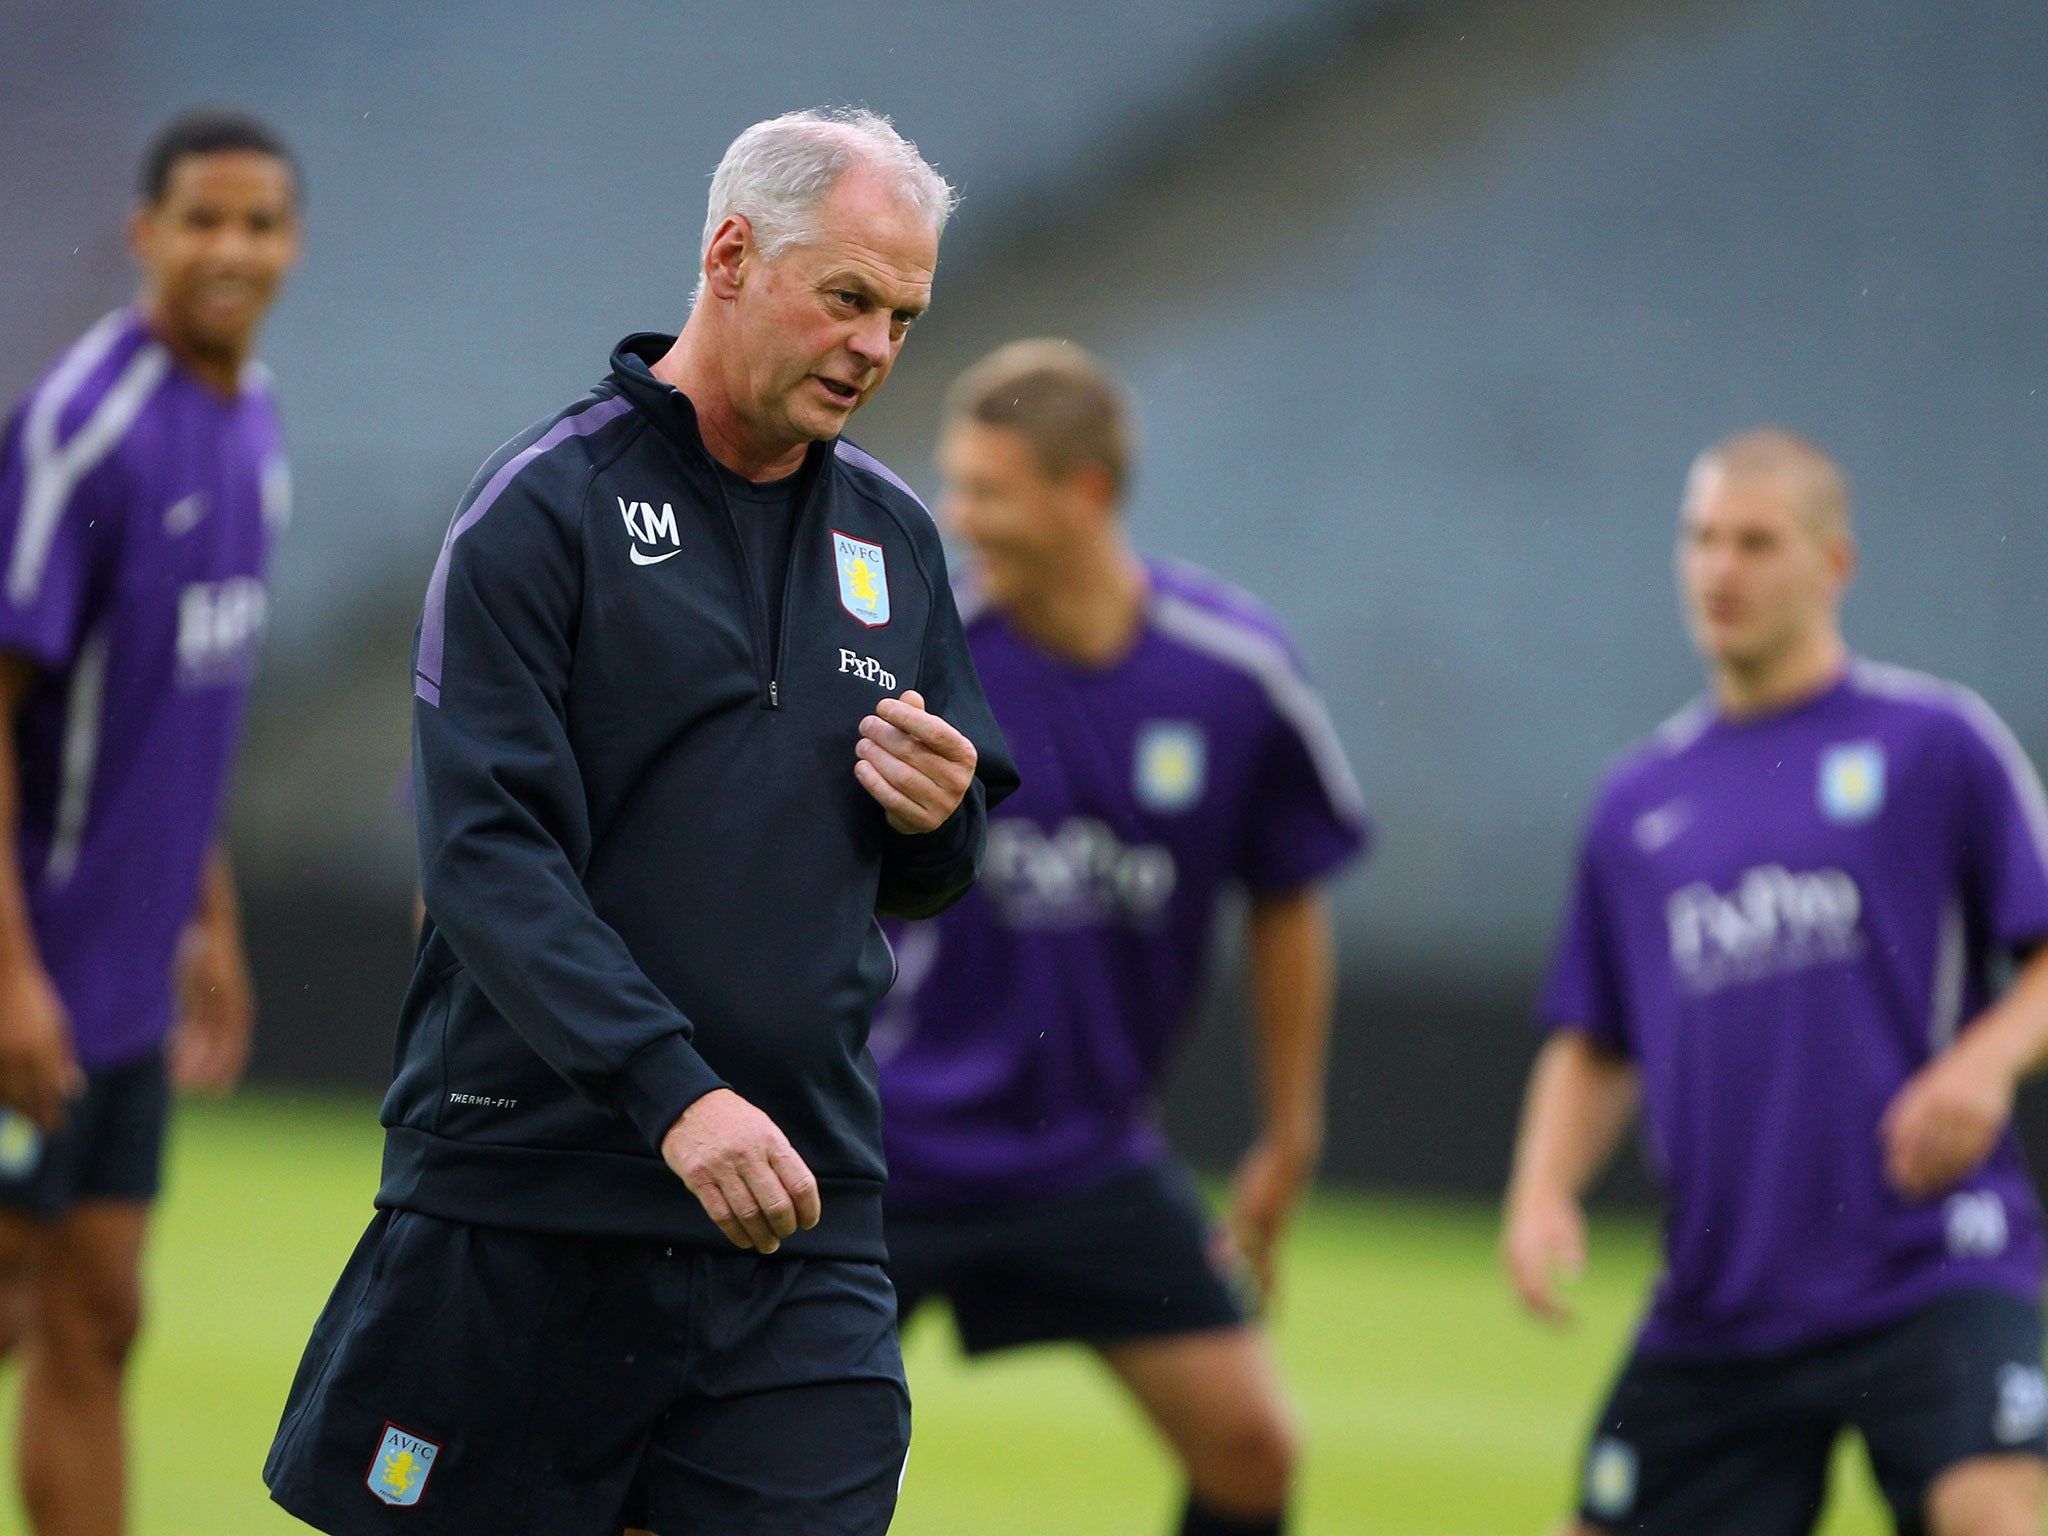 Kevin MacDonald has come under scrutiny for his alleged bullying at Aston Villa